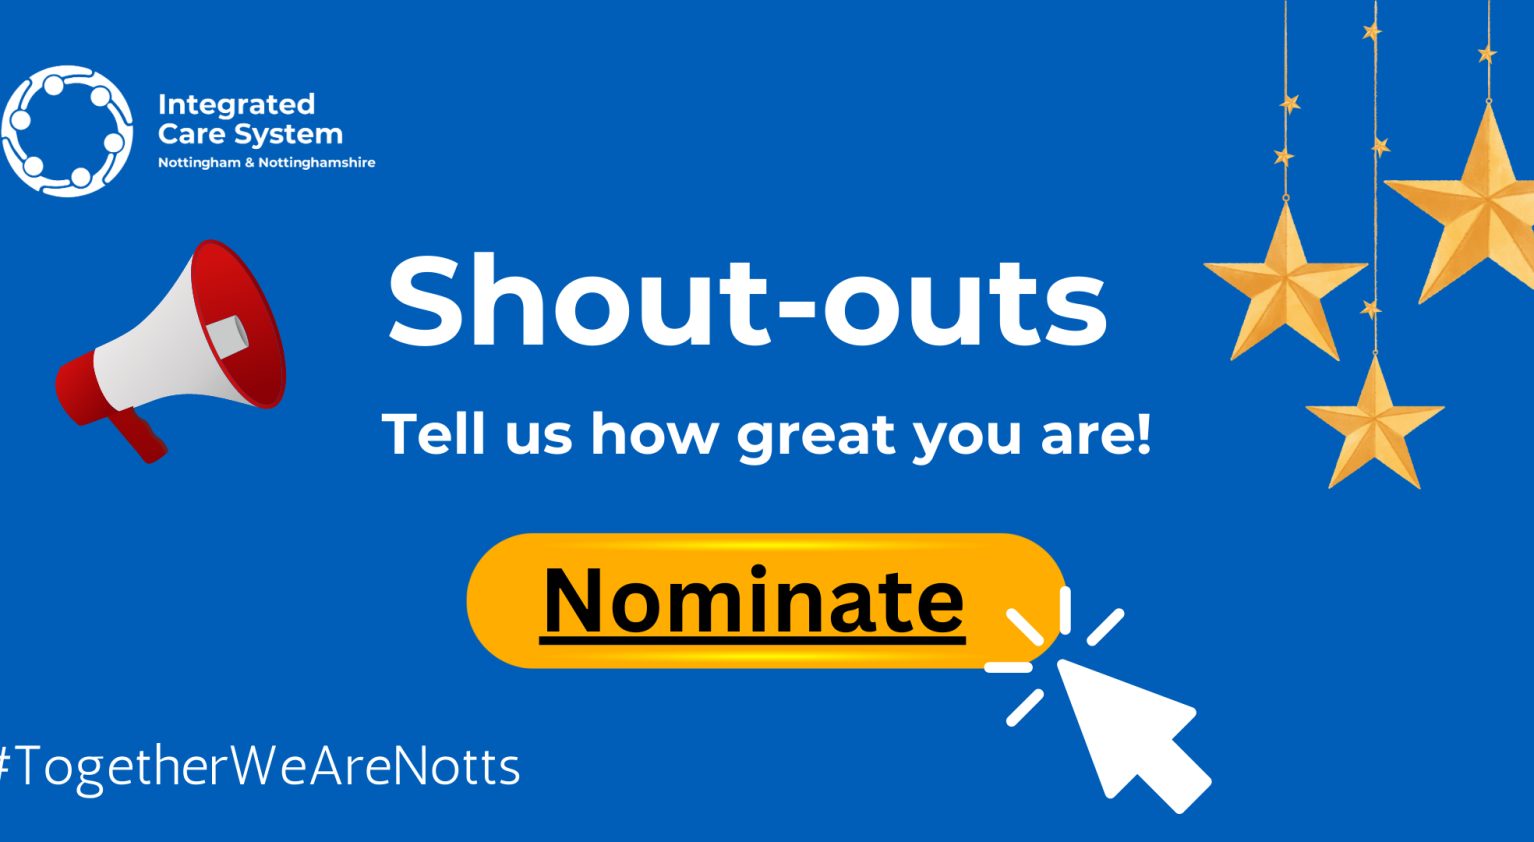 Shout - outs. Tell us how great you are. Nominate